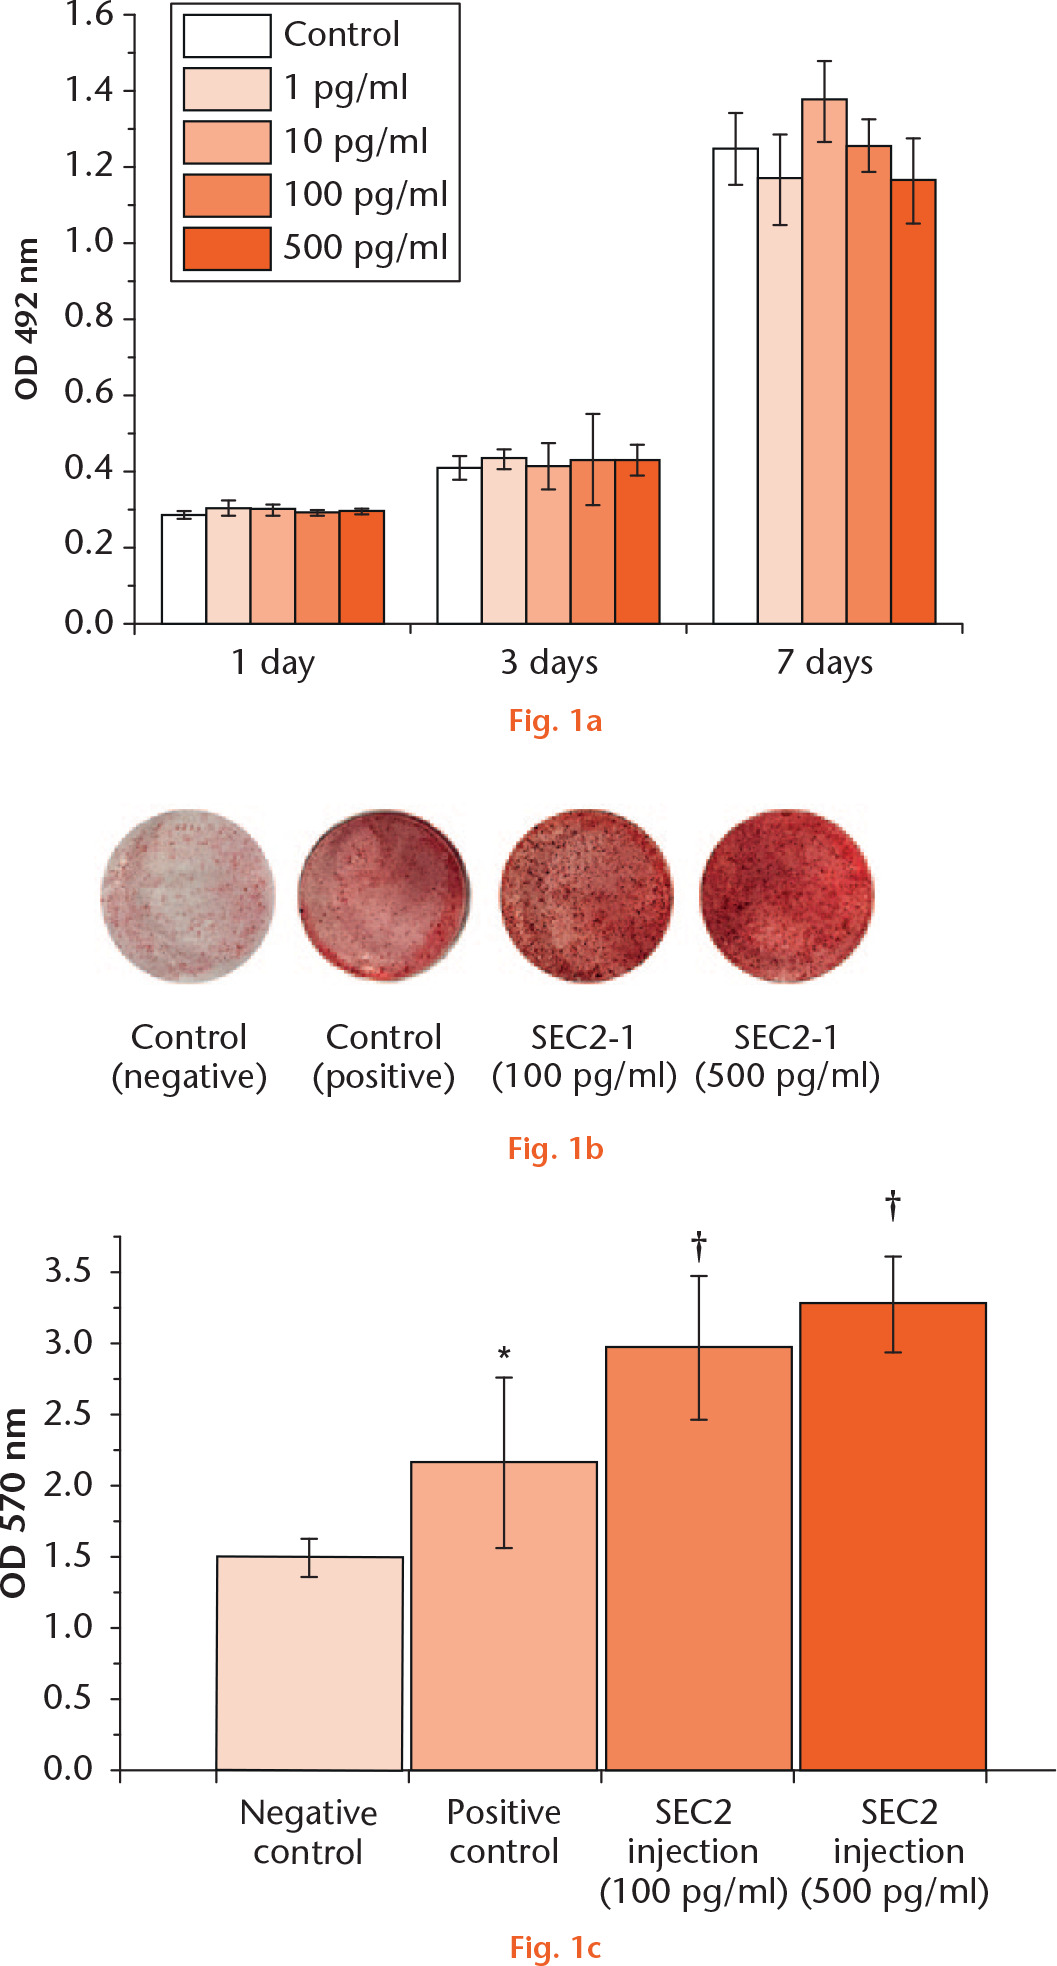  
            
              Staphylococcal enterotoxin C2 (SEC2) promoted the osteoblast differentiation of bone marrow-derived mesenchymal stem cells (BMSCs). a) Different dose of SEC2 has no obvious effect on cell viability of BMSCs. b) and c) Calcium nodule formation was evaluated by Alizarin Red S staining and quantified by colorimetric assays. *p < 0.05 versus negative control; †p < 0.01 versus negative control. OD, osteogenic differentiation.
          